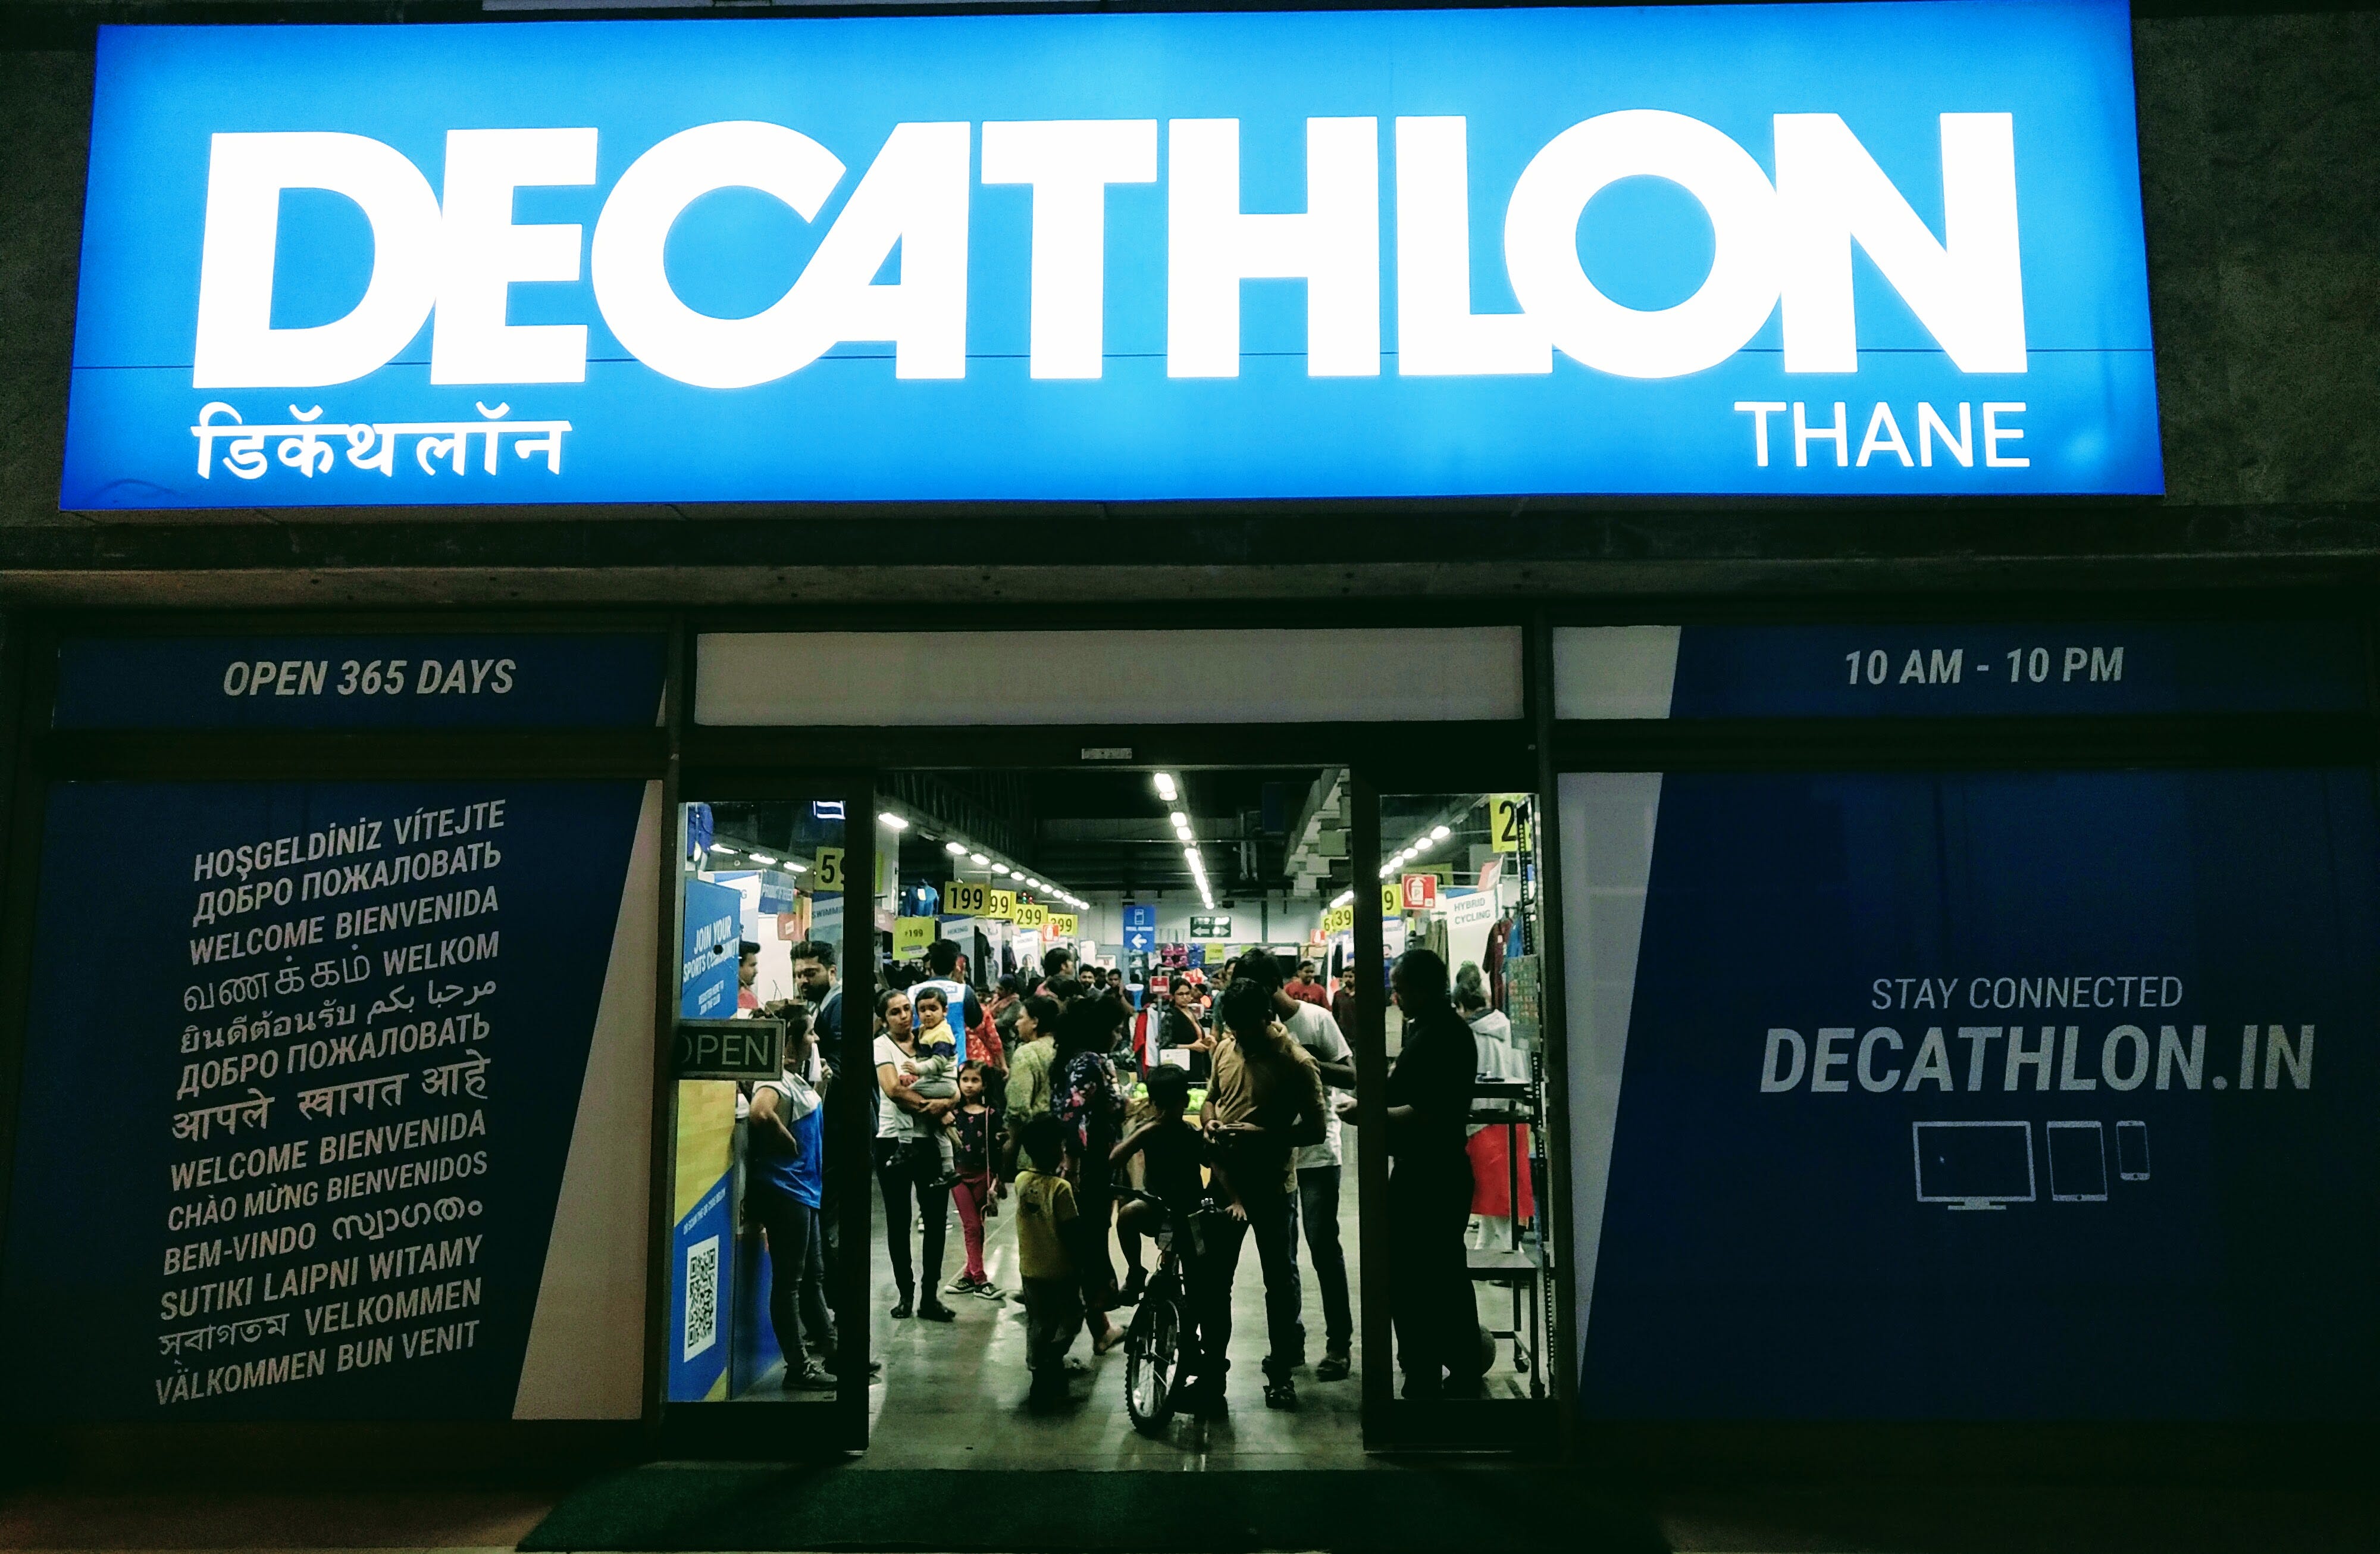 Decathlon Sports India - Our team of running enthusiasts designed